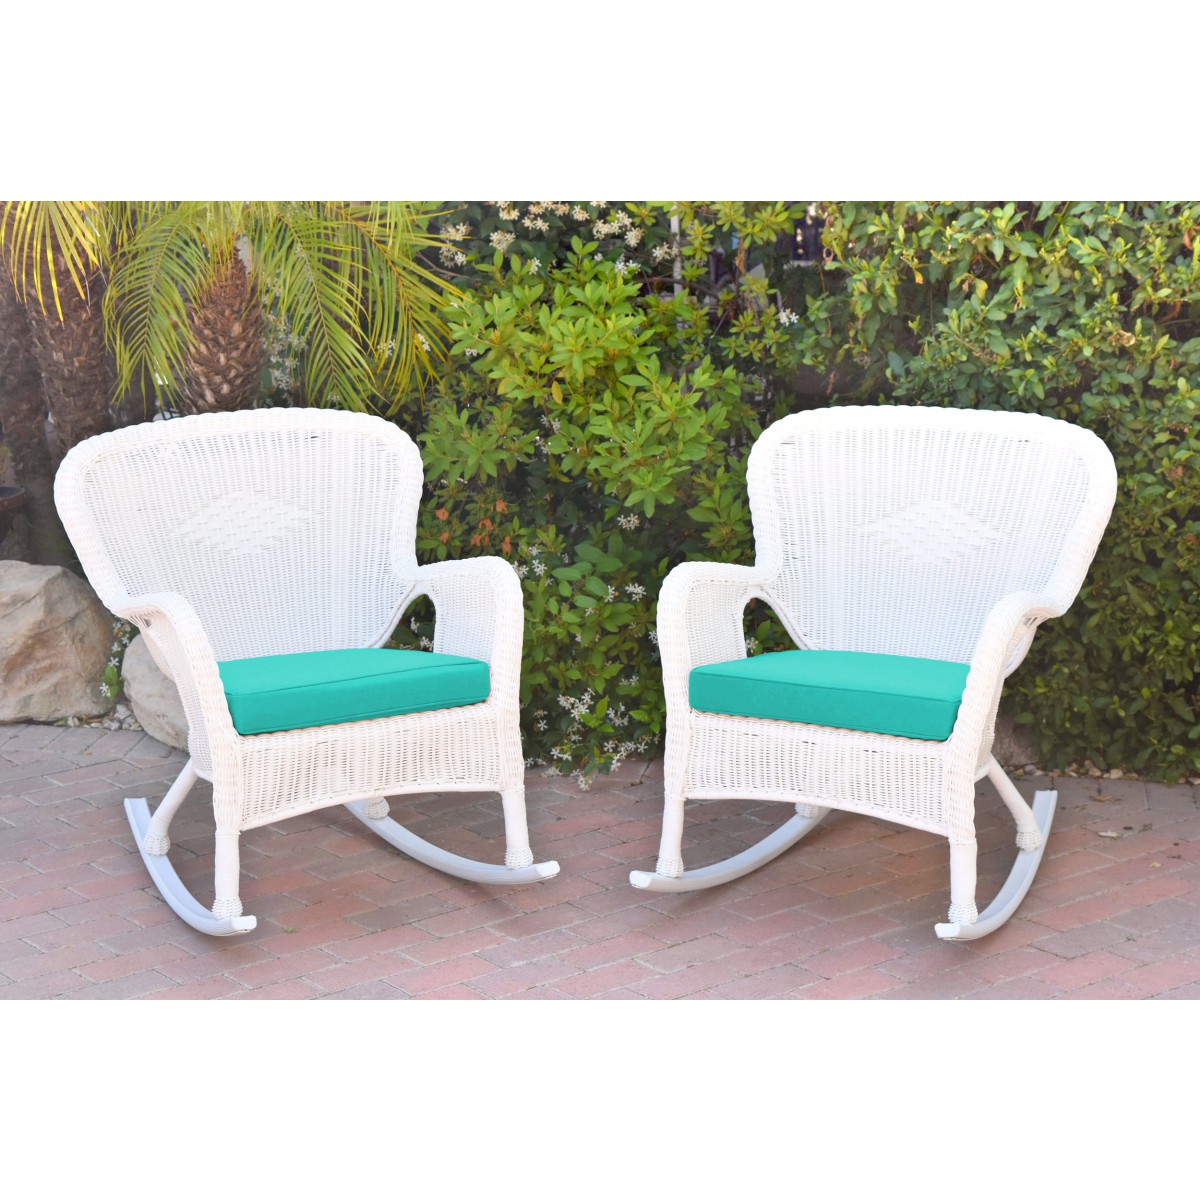 Set of 2 Windsor White Resin Wicker Rocker Chair with Turquoise Cushions